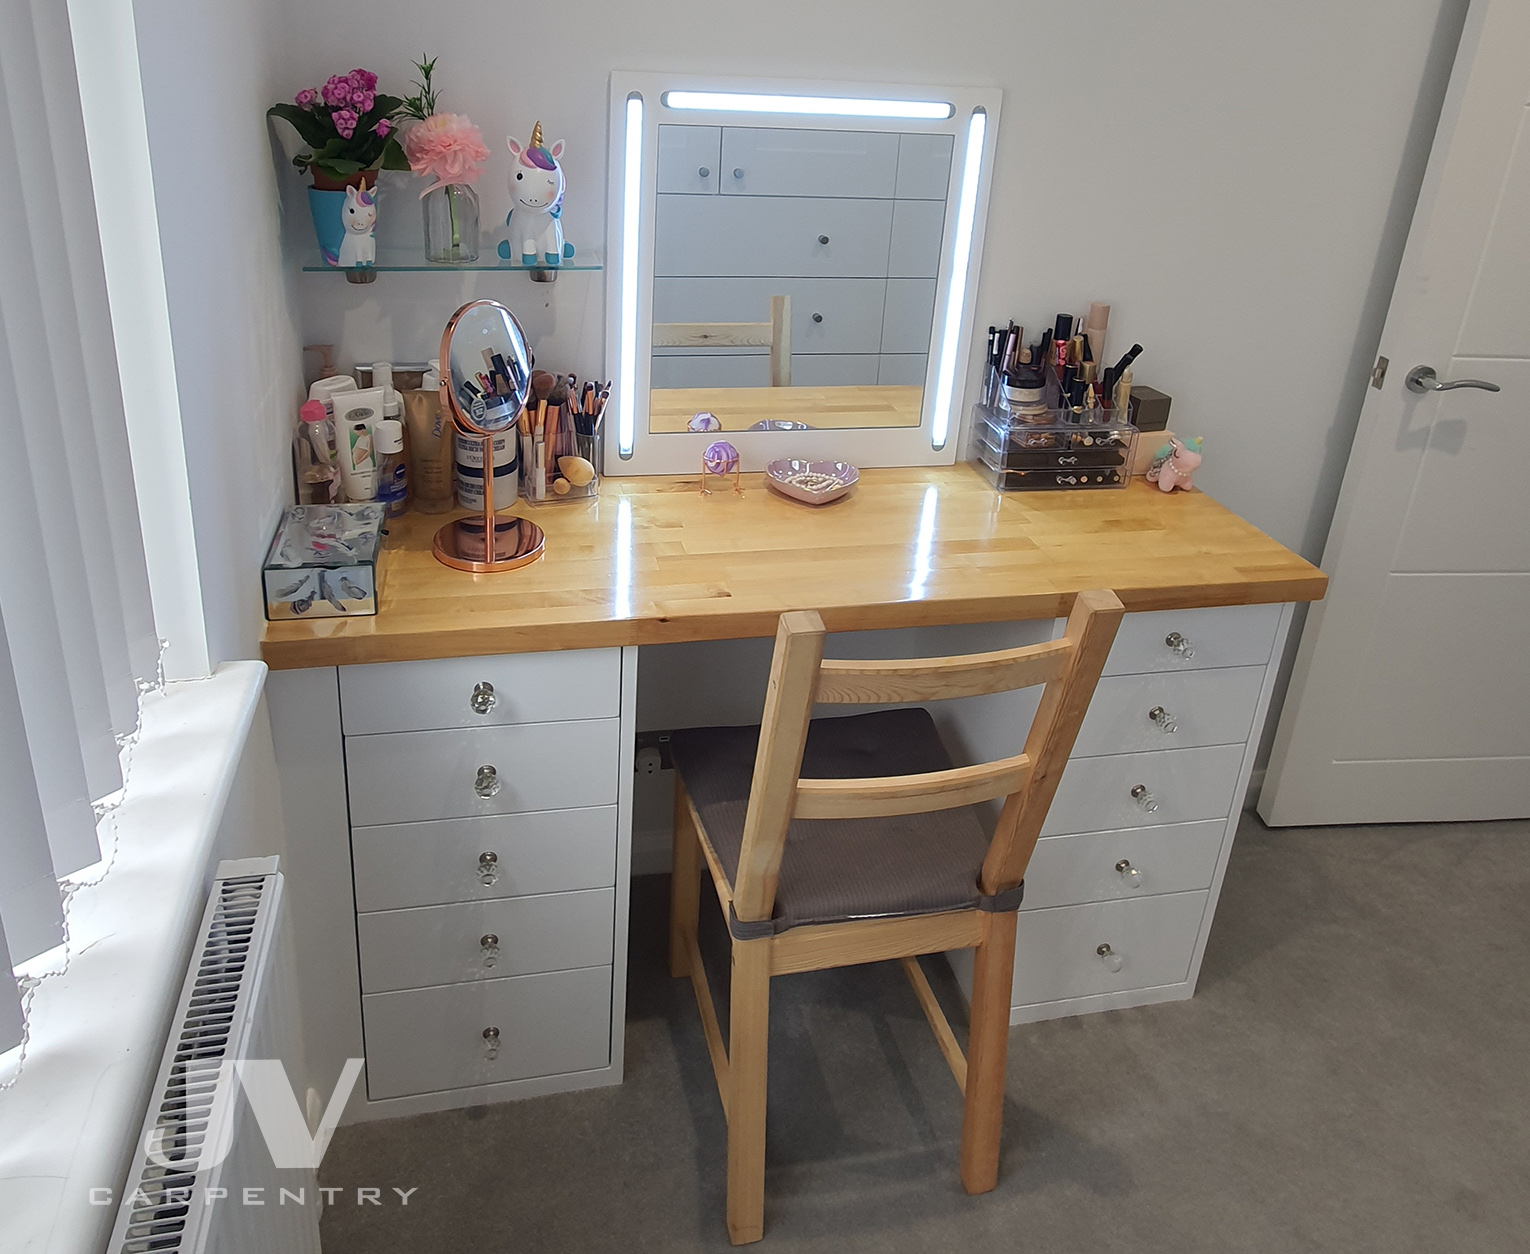 made-to-measure dressing table with fitted mirror and wooden counter top